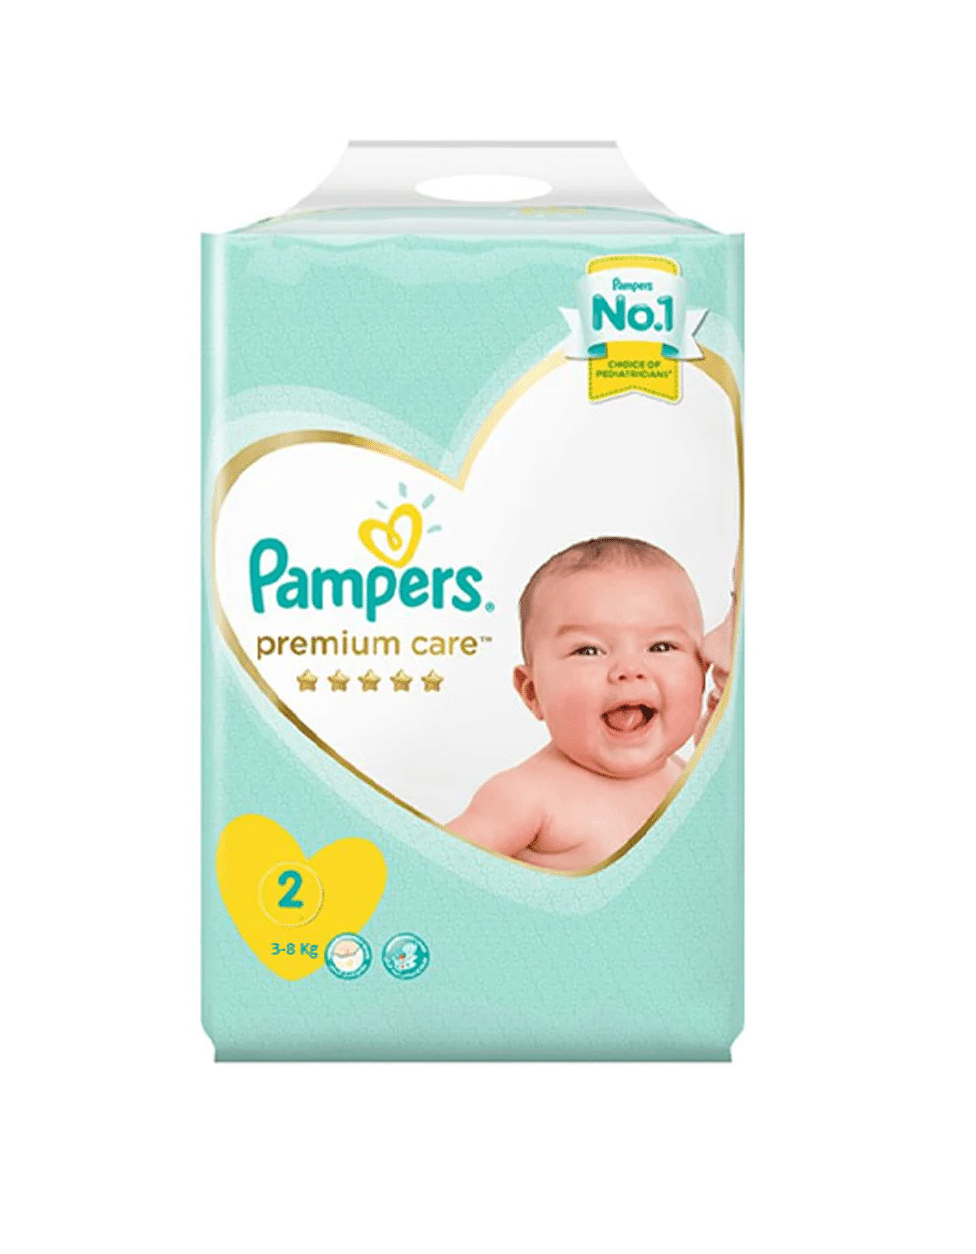 Achat Pampers Premium Protection · Couches · Taille 6 - 13+ kg